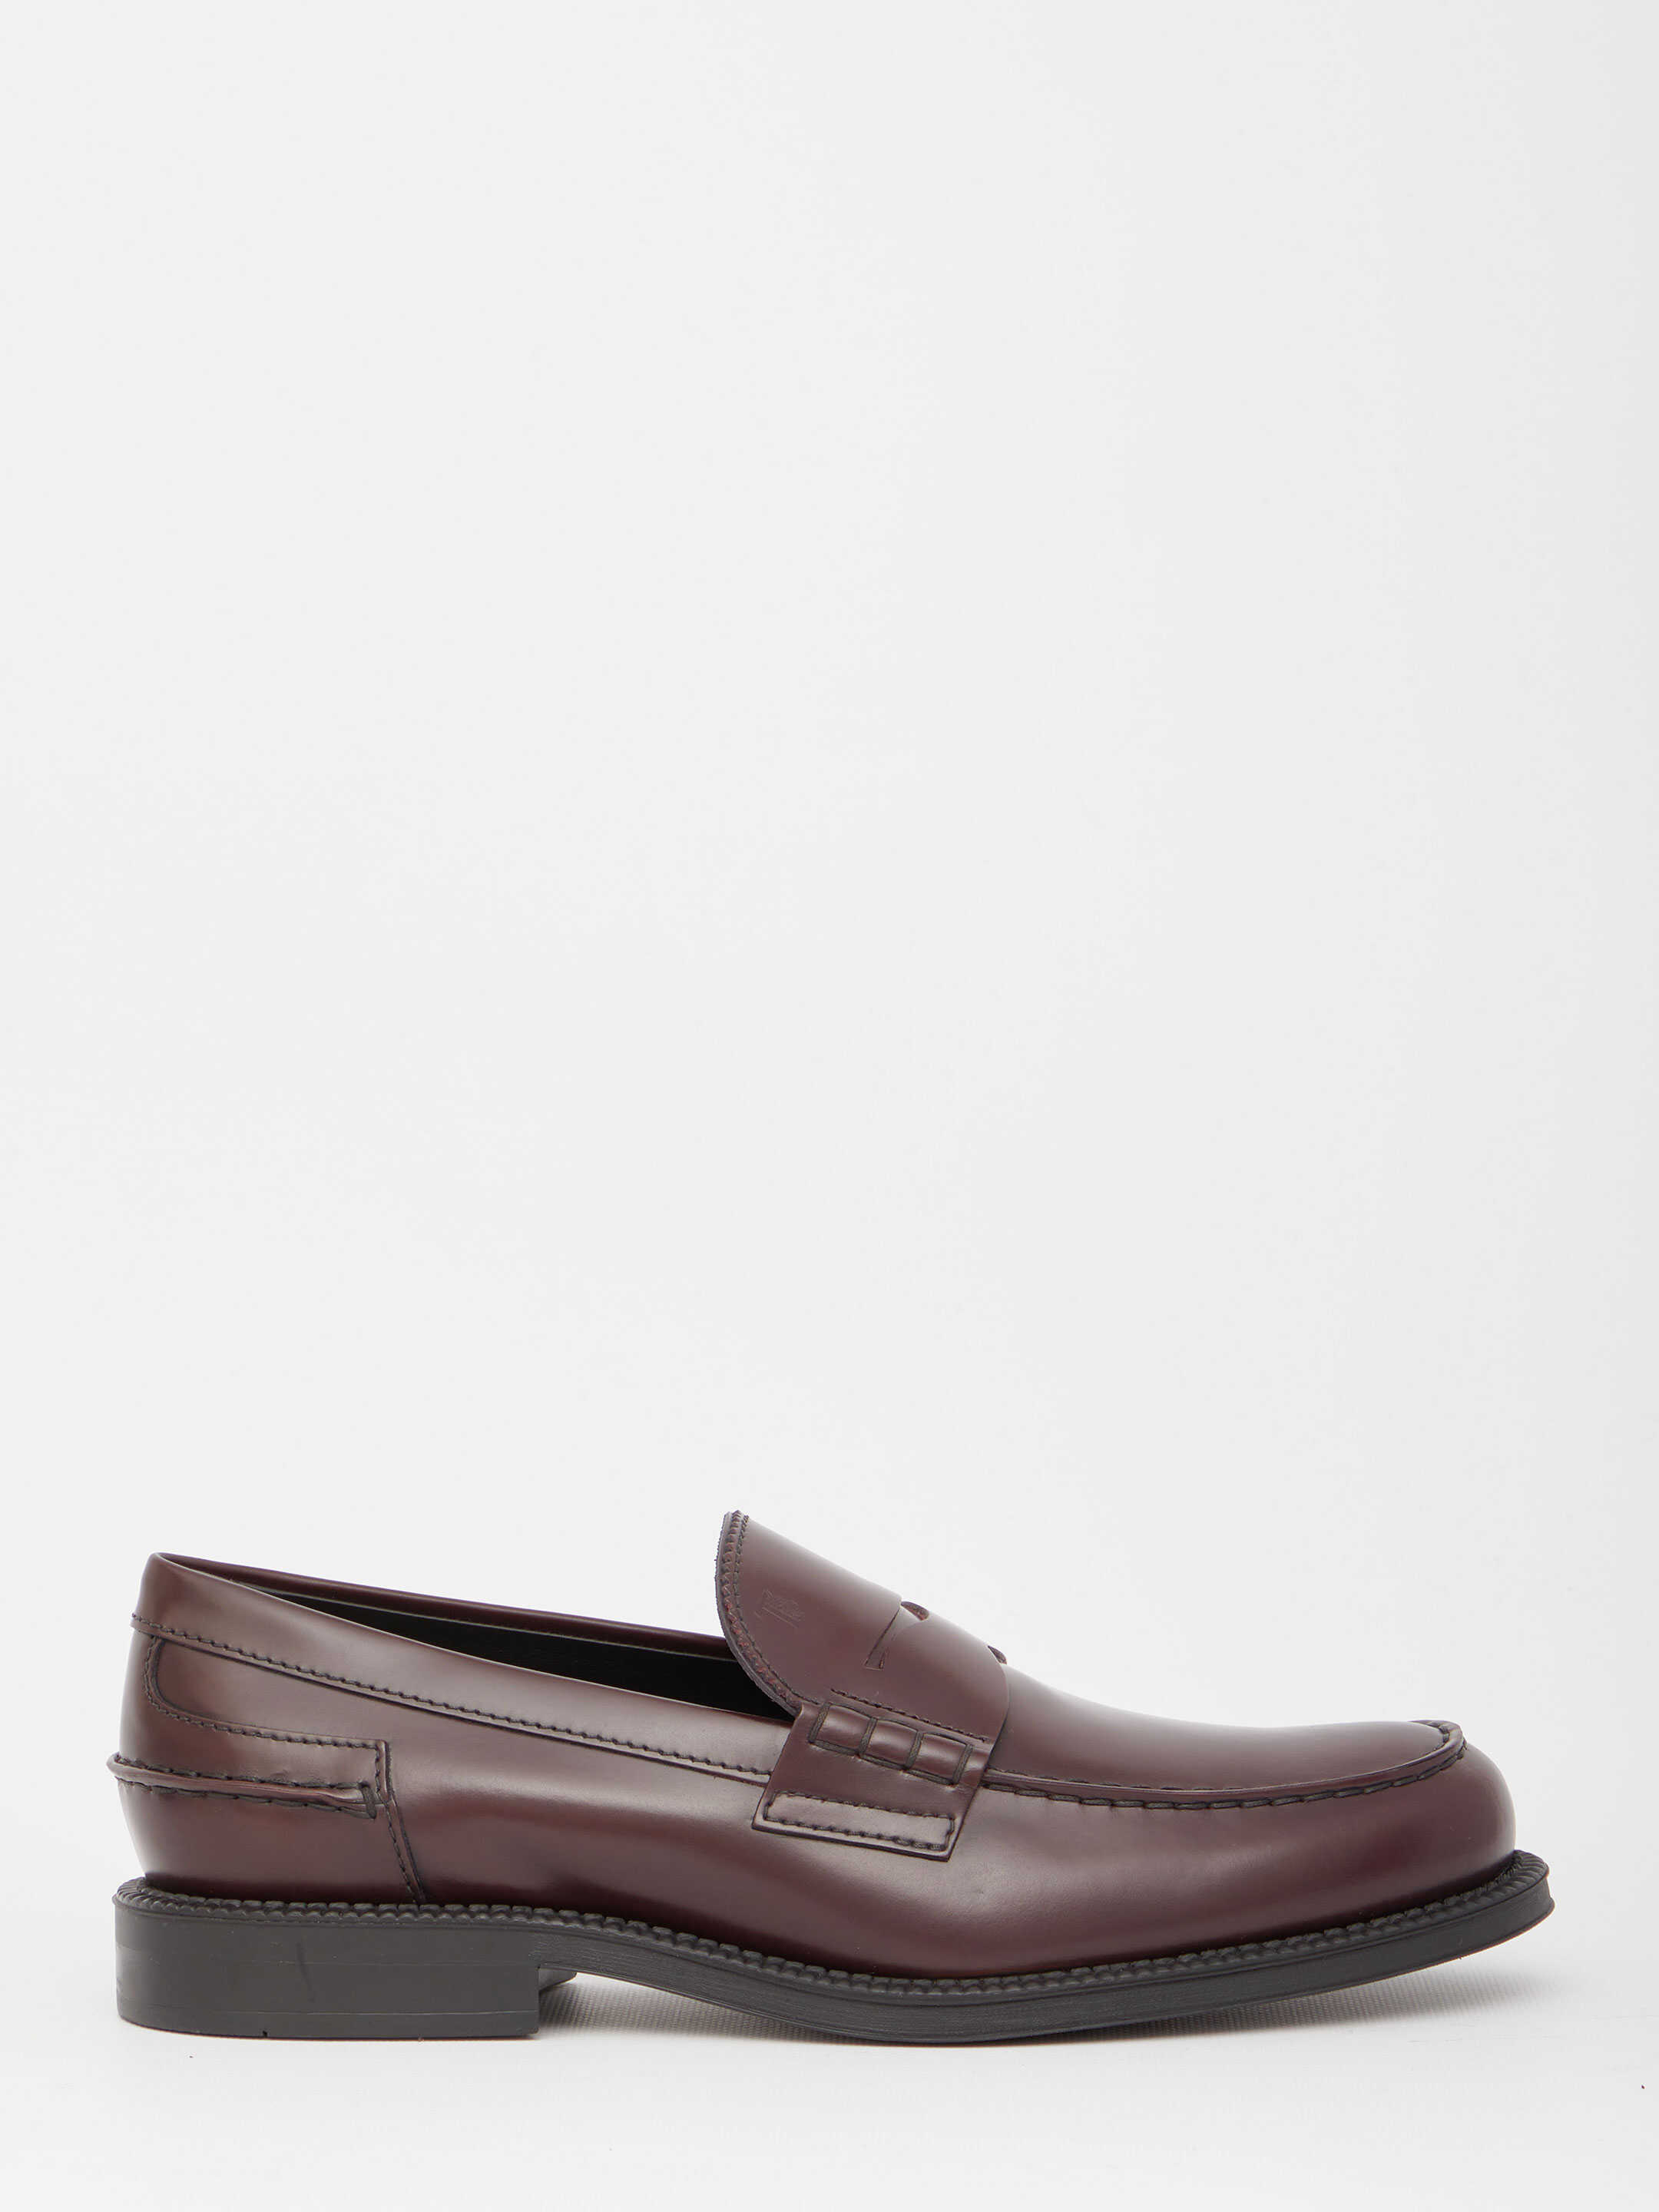 TOD'S Leather Loafers Bordeaux image0